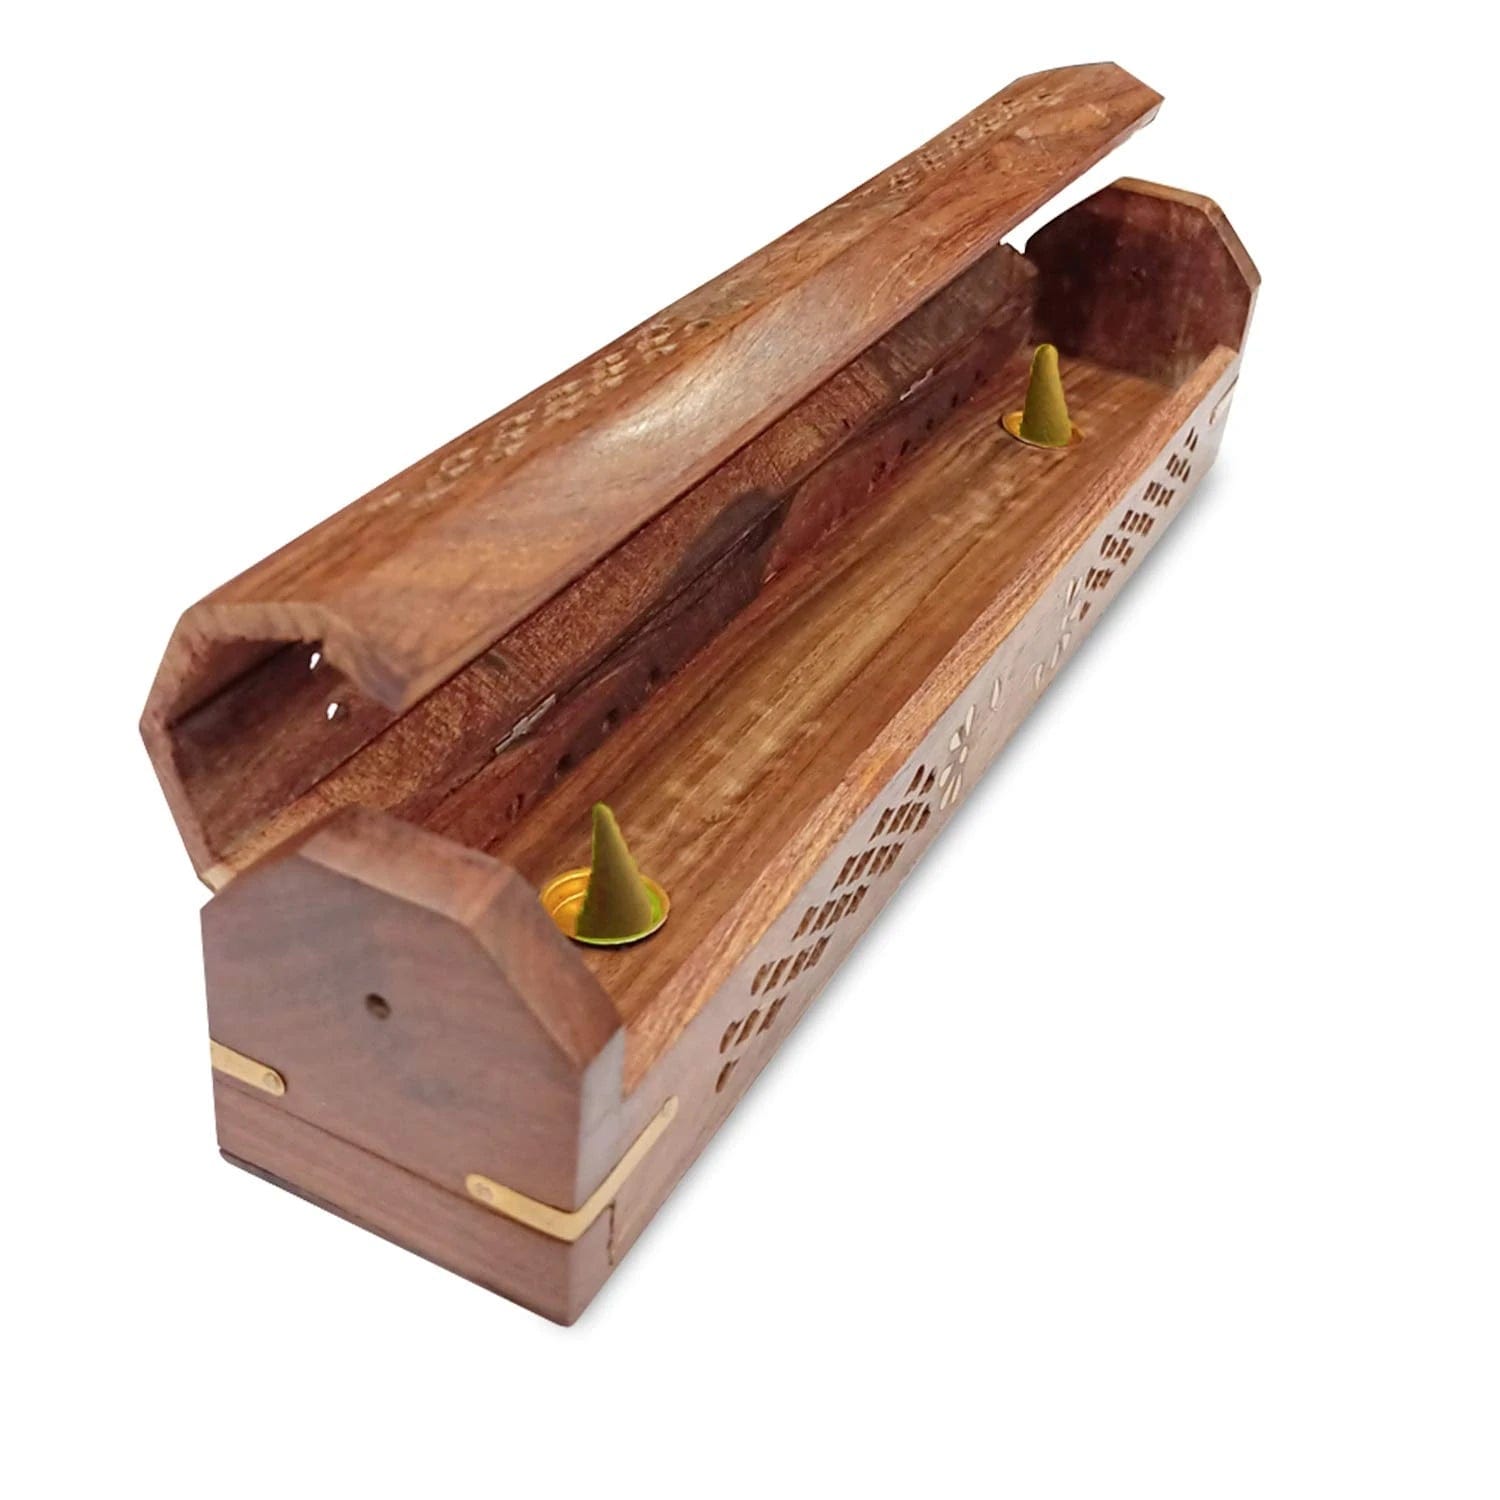 SHEESHAM WOODEN INCENSE STICK HOLDER AND DHOOP BATTI STAND FROM